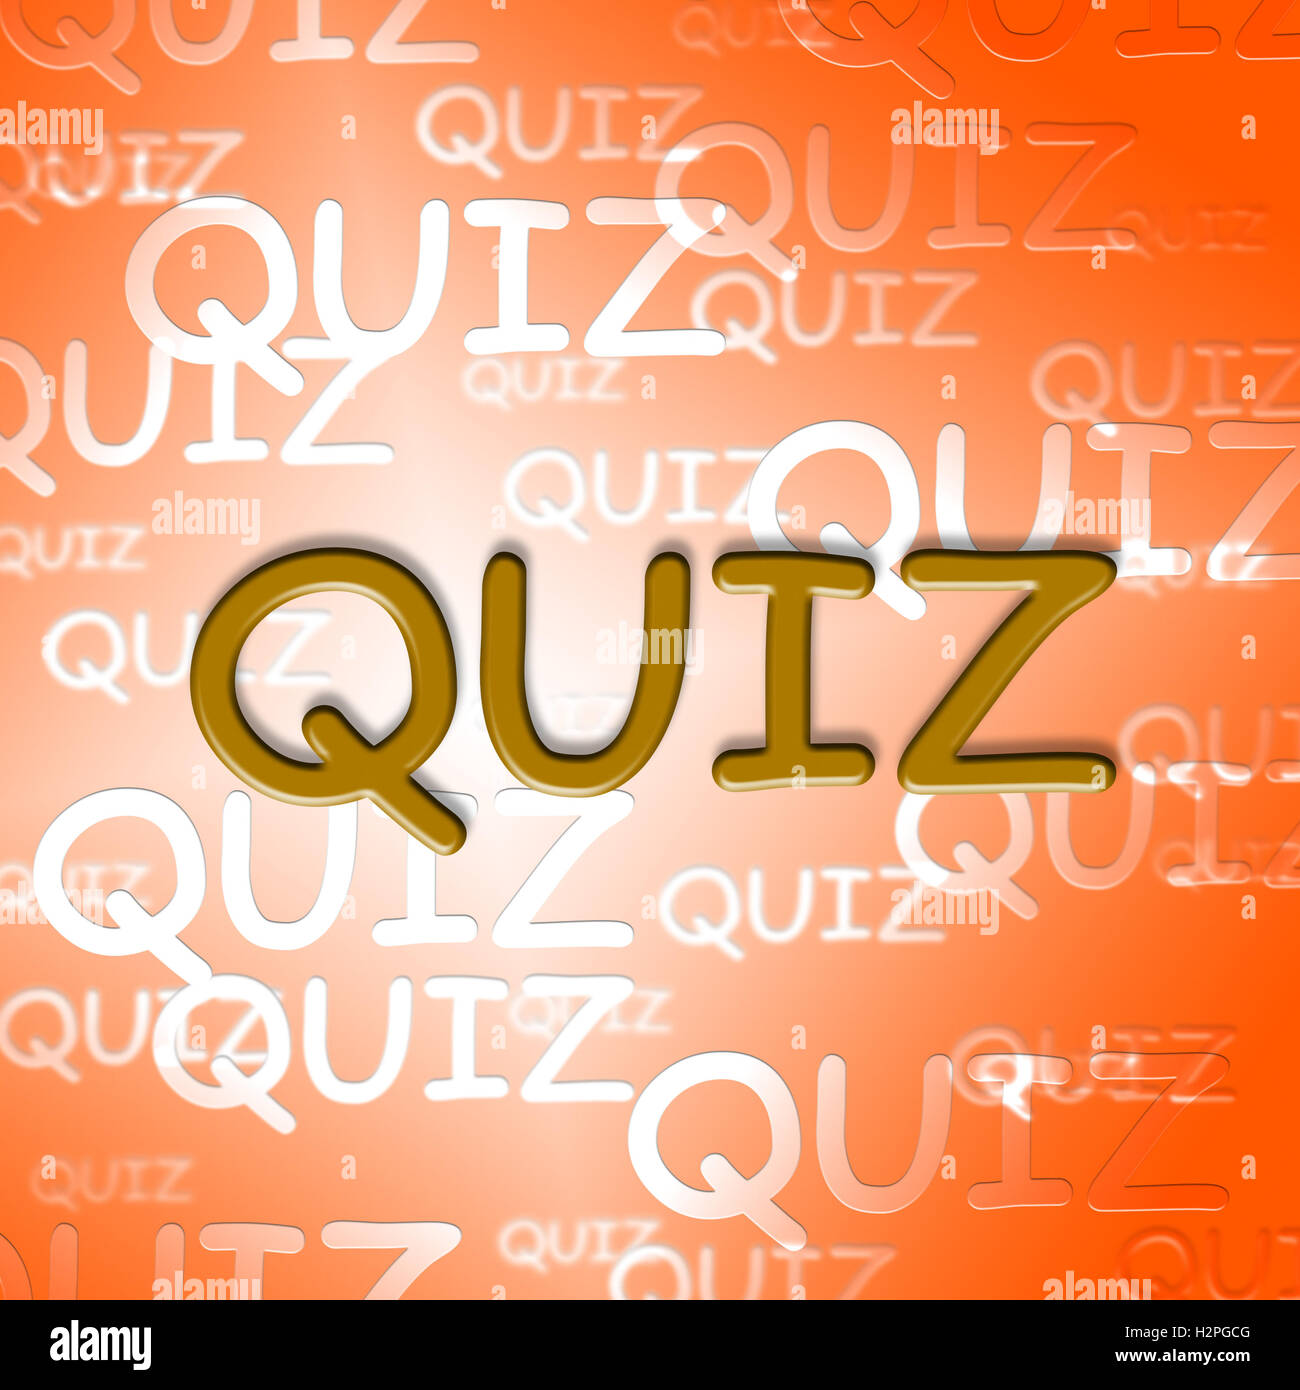 Quiz Words Representing Questions And Answers Puzzle Stock Photo - Alamy